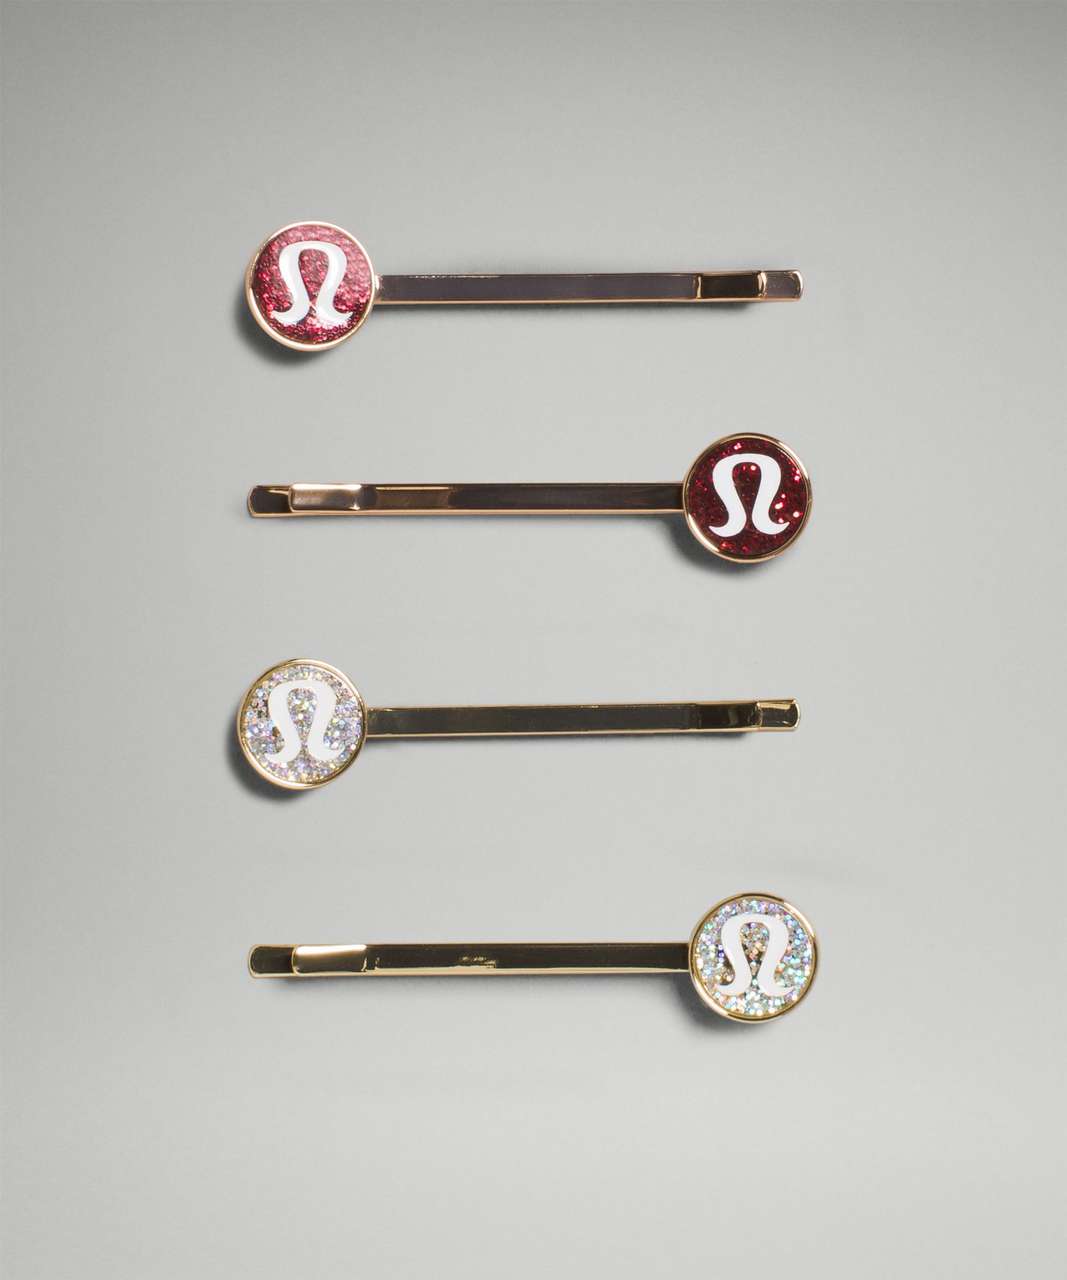 Lululemon Logo Bobby Pins *4 Pack - Wine Berry / Wine Berry / White / Rose Gold / Silver / Clear / White / Gold